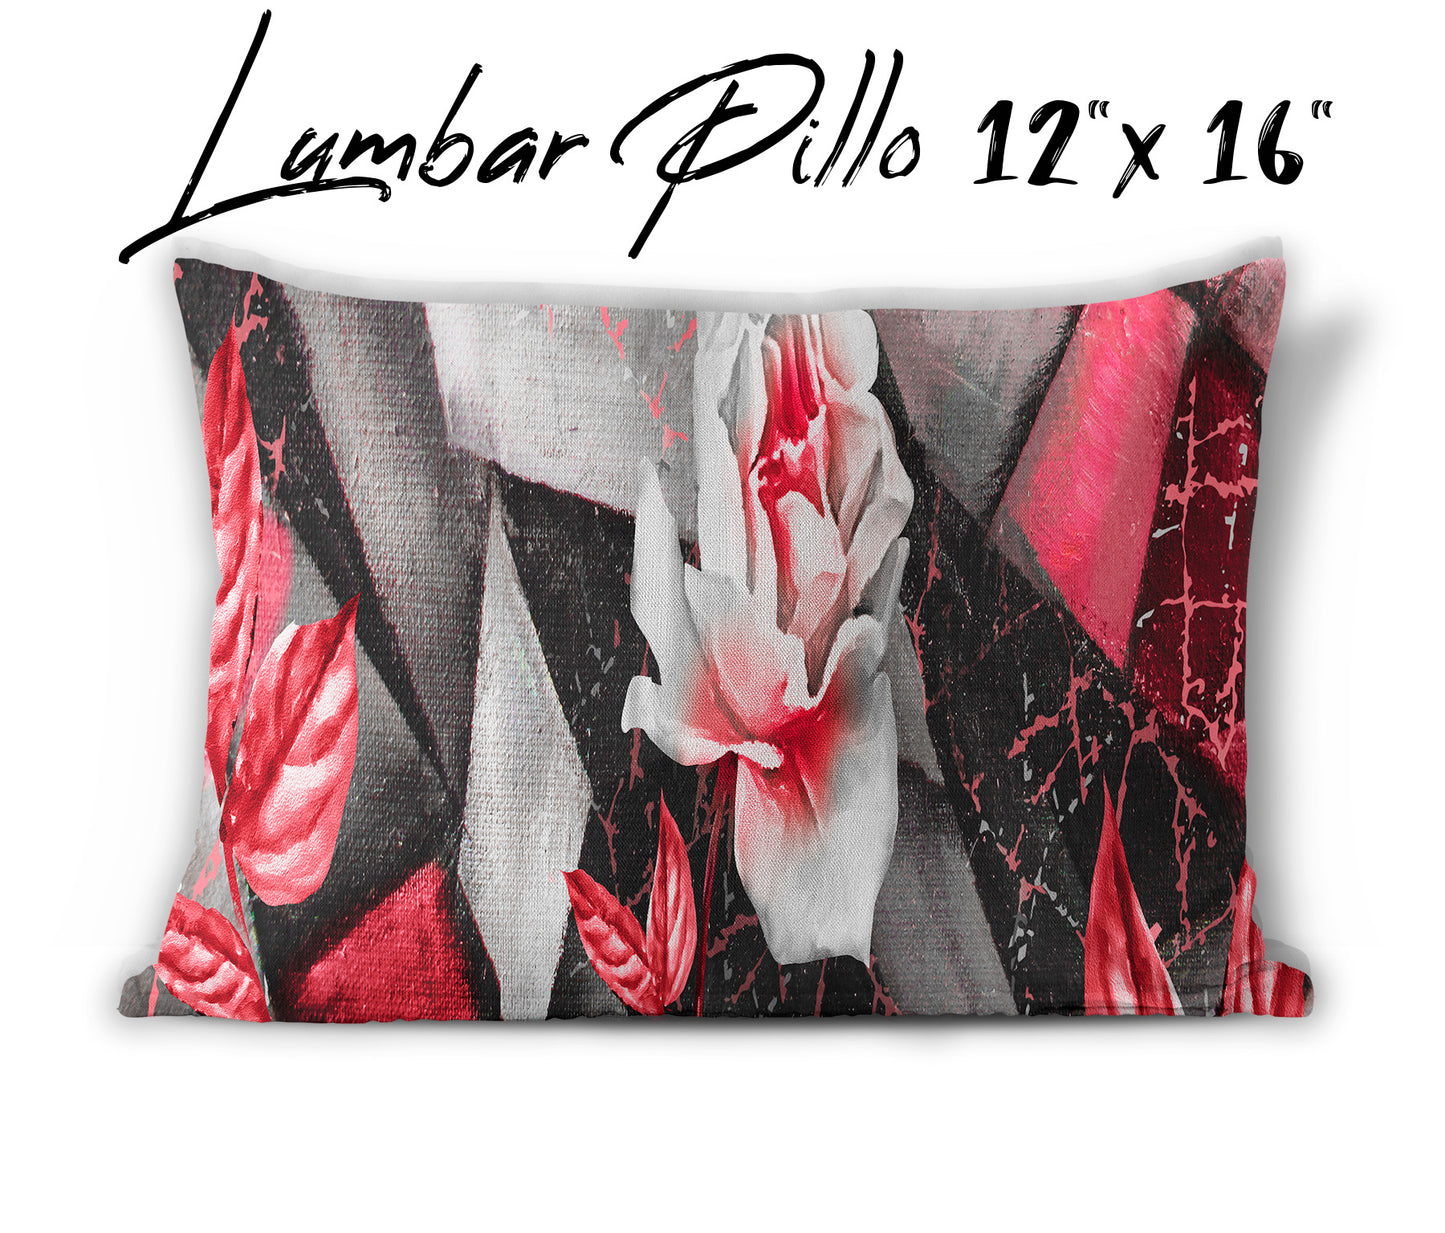 Abstract Red Rose Comforter Set